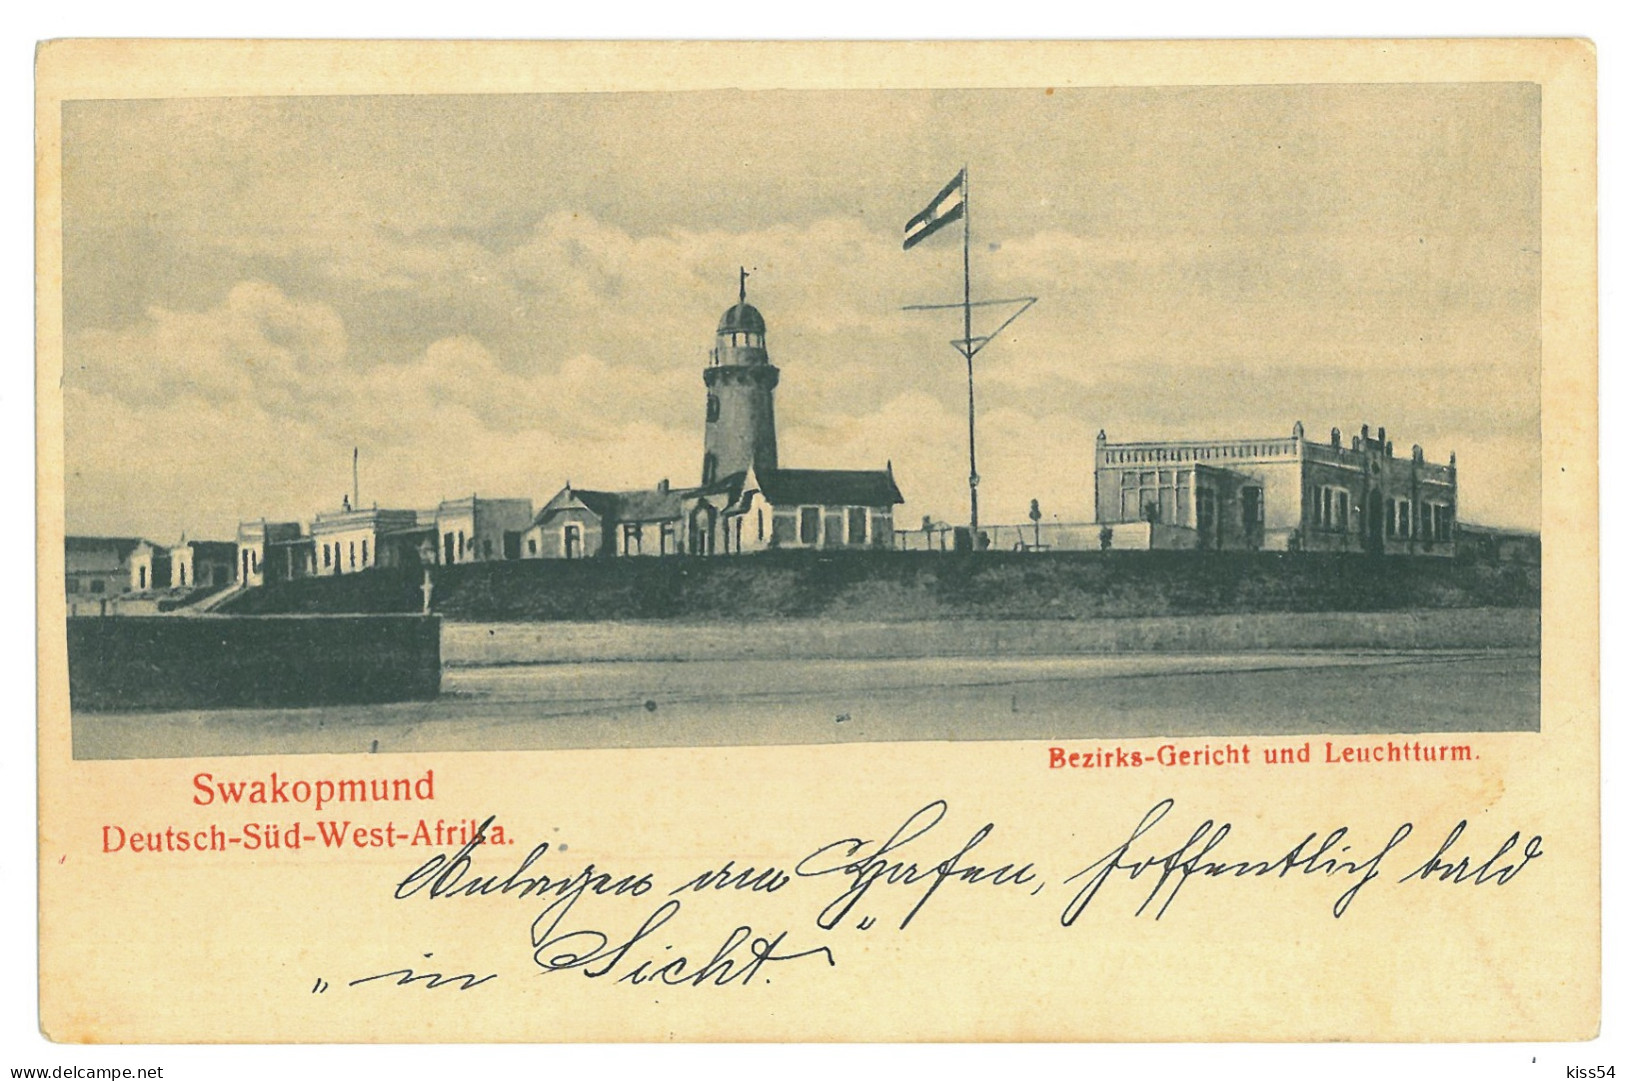 NAM 8 - 23807 SWAKOPMUND, The Courthouse And The Lighthouse D.S.W. Afrika, Namibia - Old Postcard - Unused - Namibie